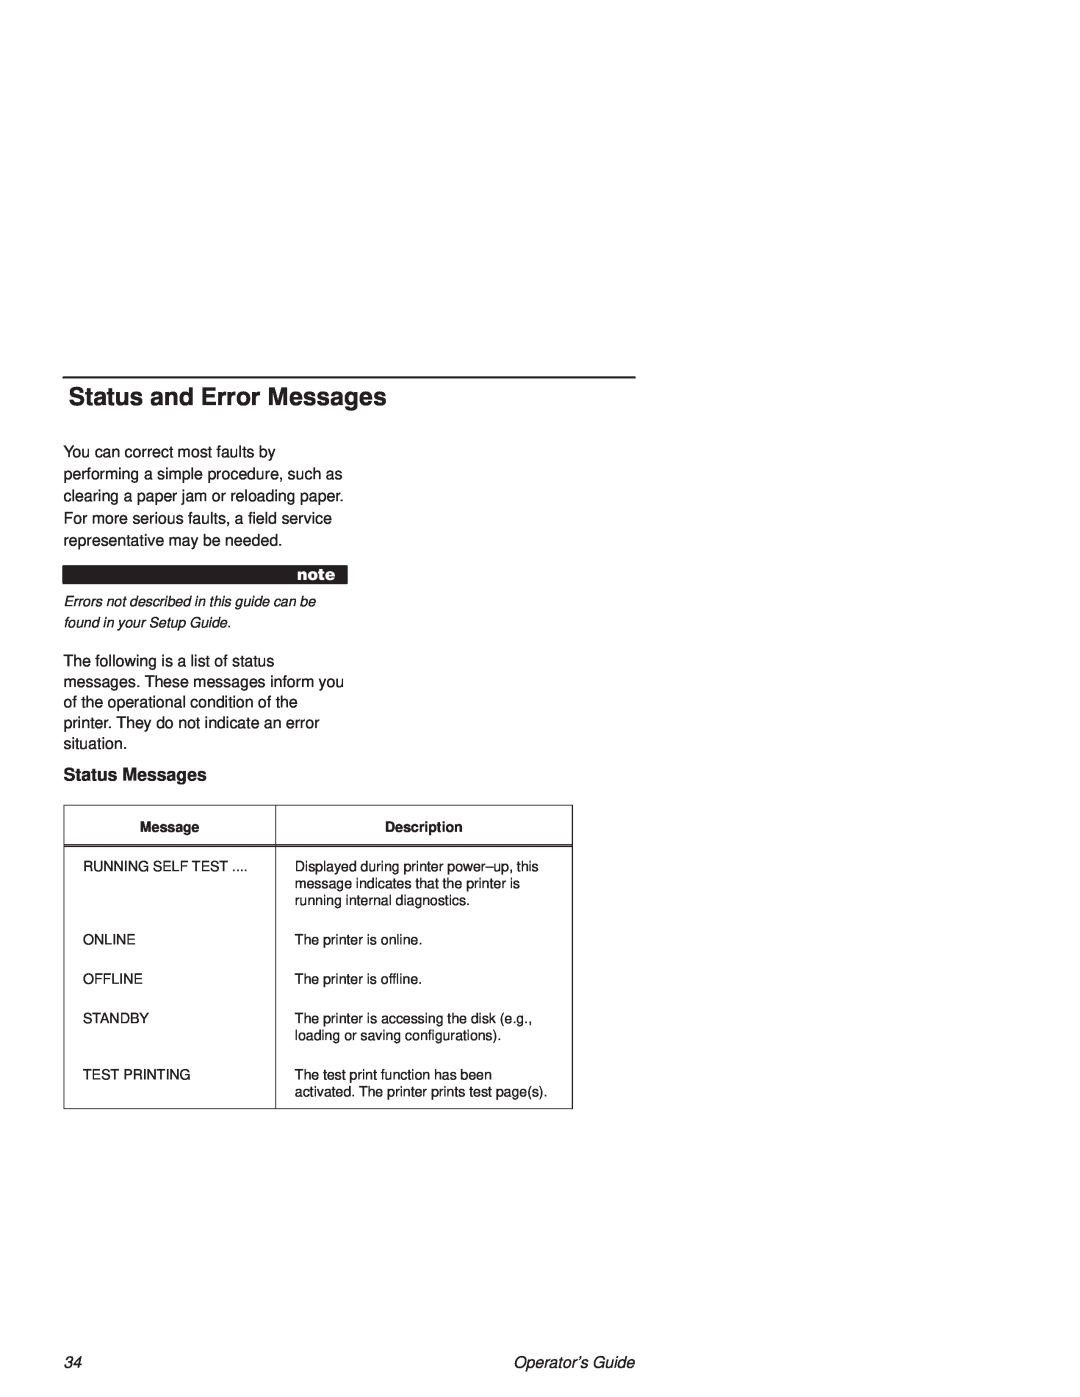 Printronix L1524 manual Status and Error Messages, Status Messages 